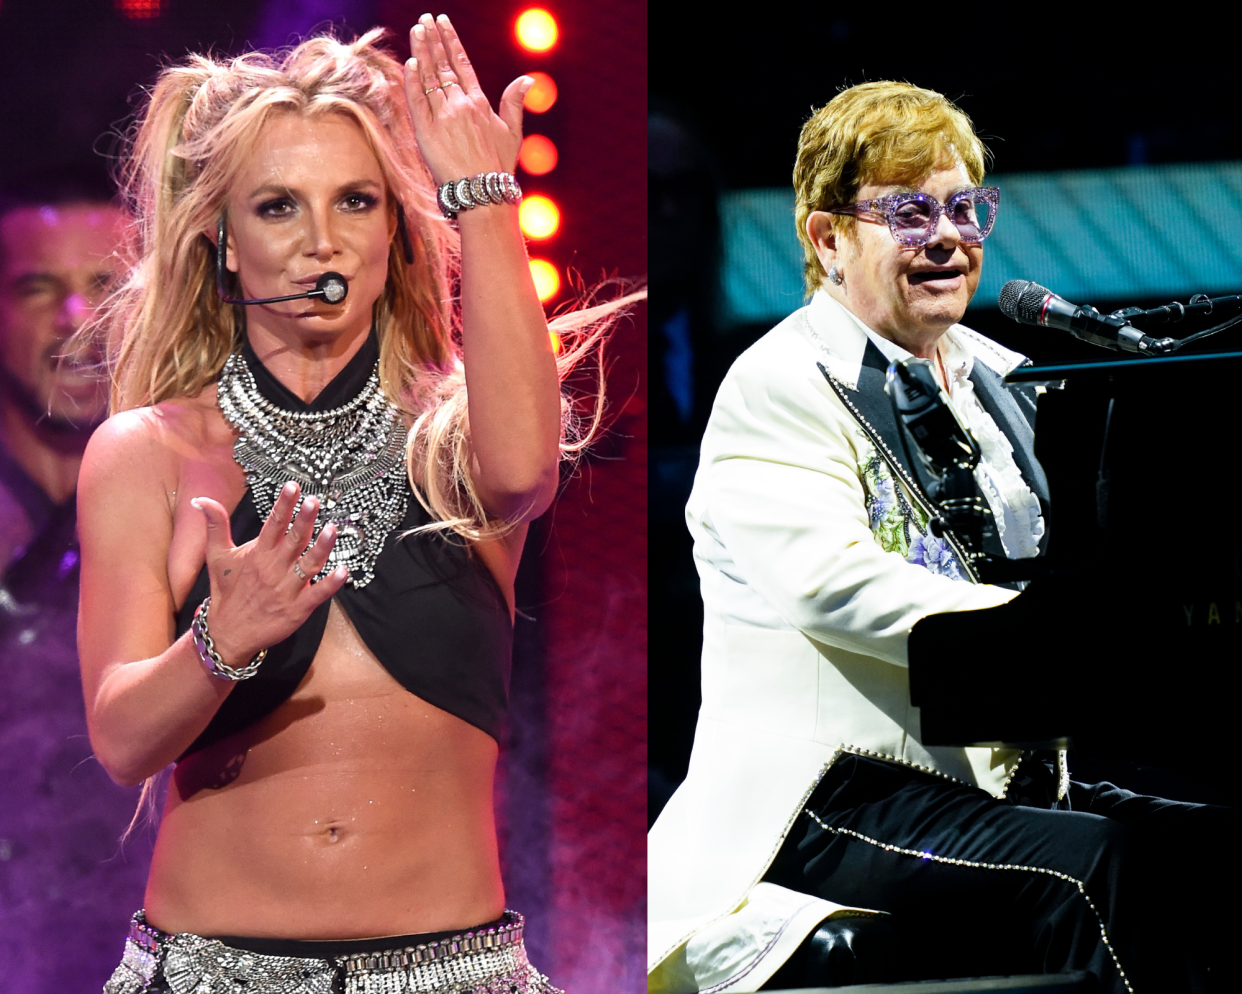 "Hold Me Closer," a collaboration with rocker Elton John, marks Britney Spears' first single since the termination of her 13-year conservatorship last year.